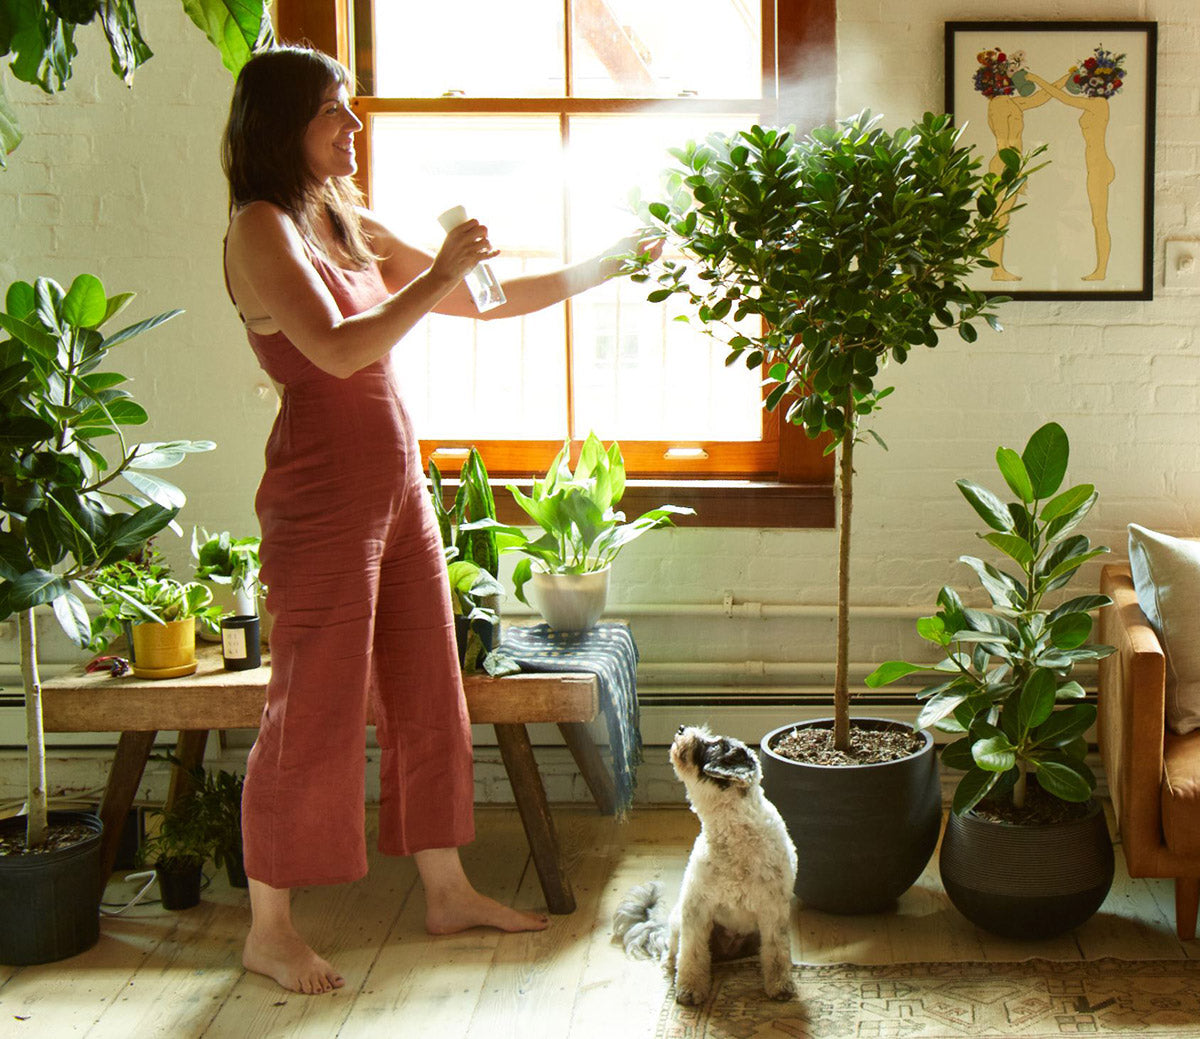 Greenery Unlimited | My Top Five Favorite (and Essential) Houseplant Tools